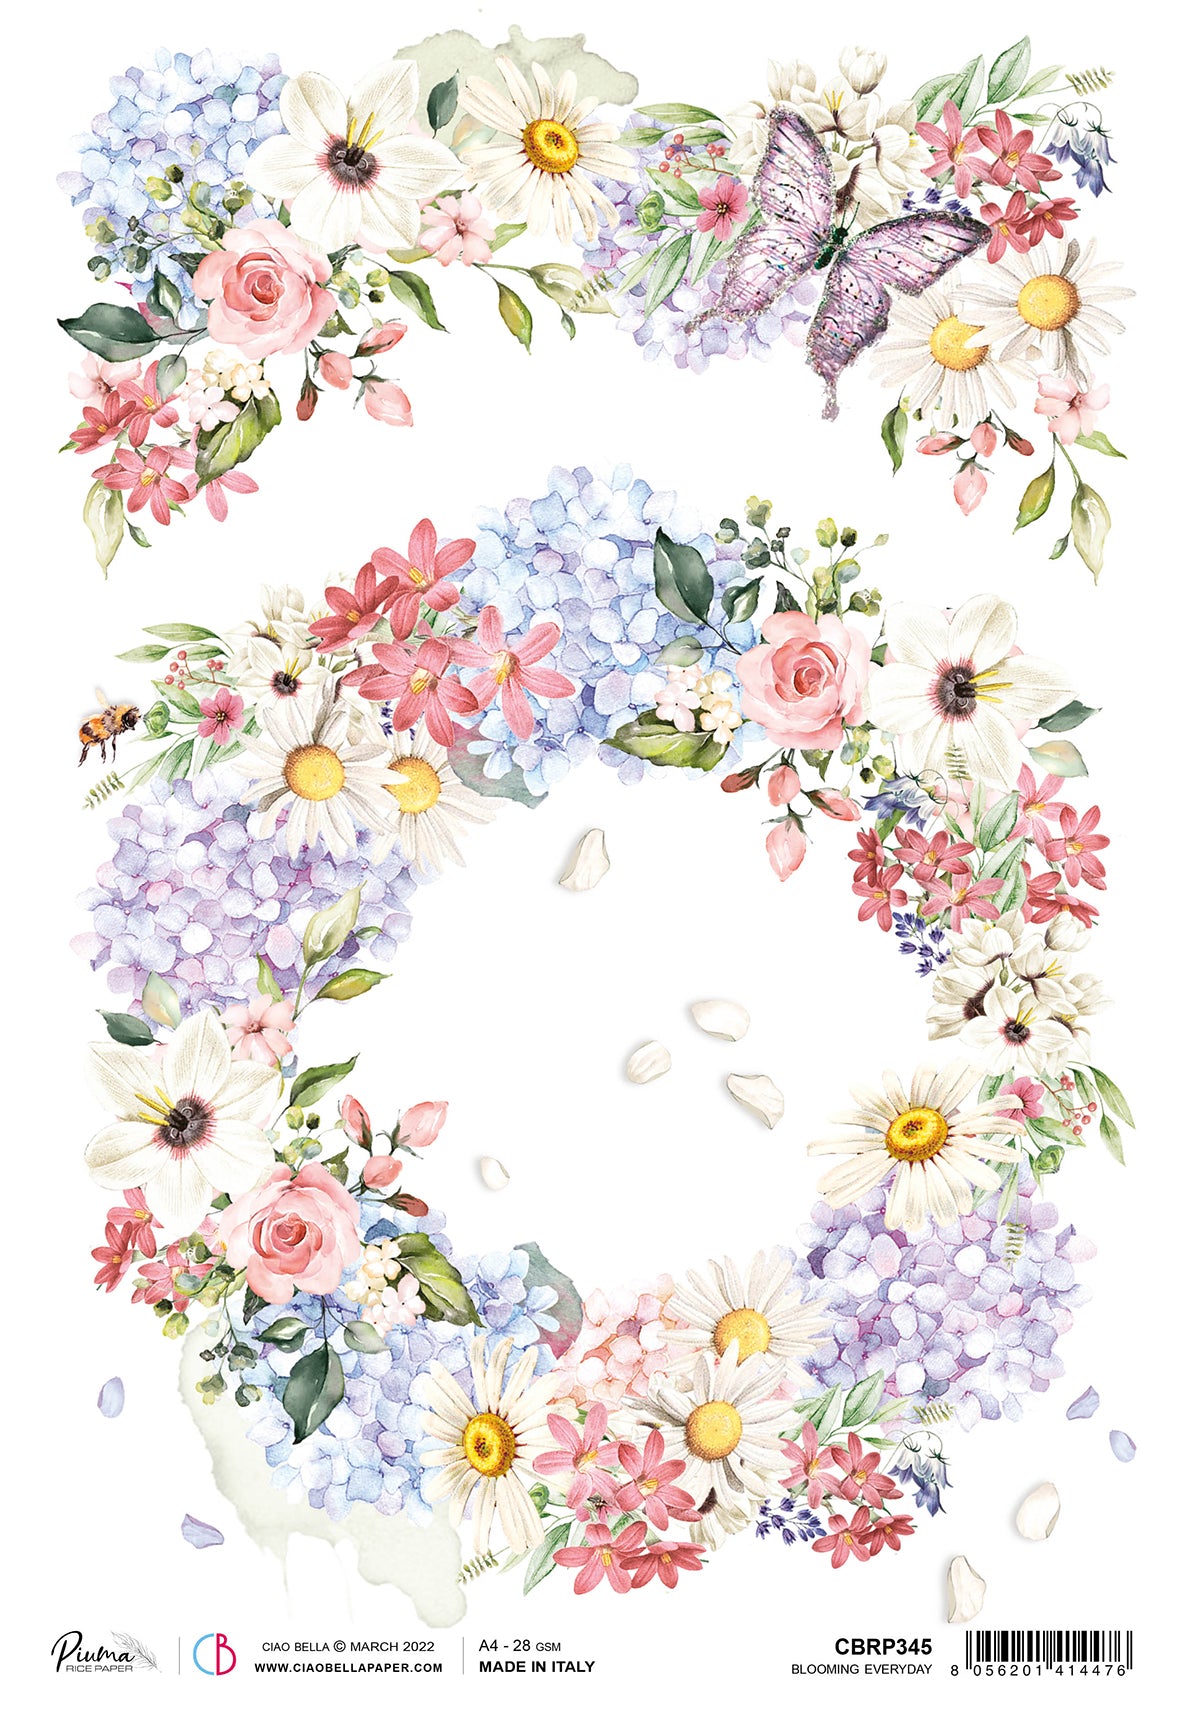 Ciao Bella Rice Paper A4 Piuma Blooming Everyday - 5 Sheets